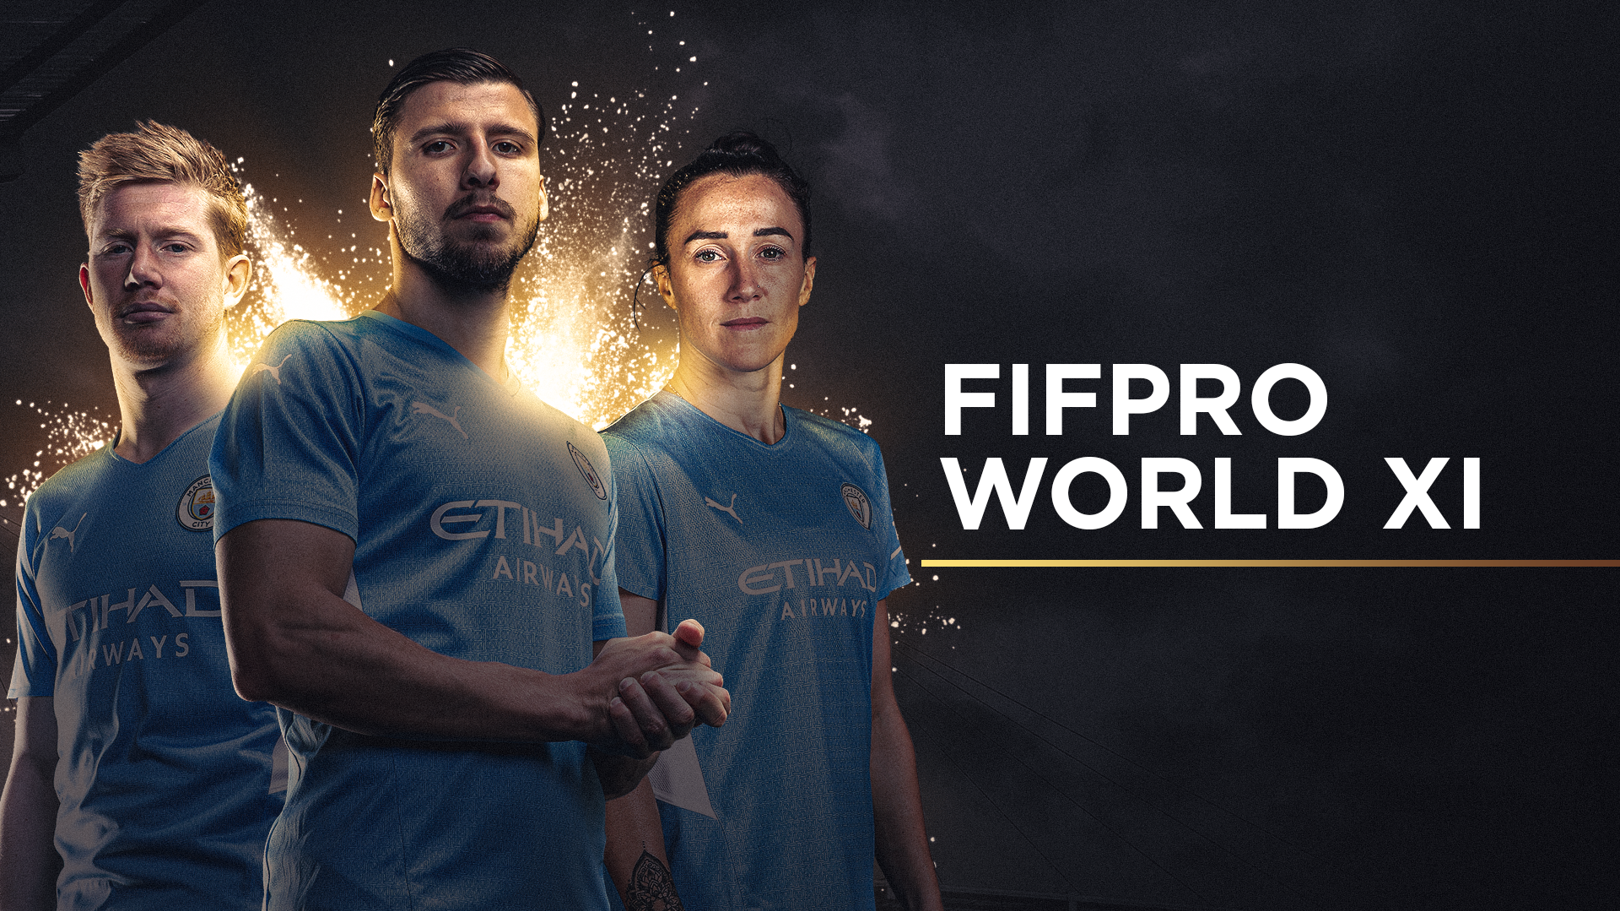 De Bruyne, Dias and Bronze named in FIFPRO World XI